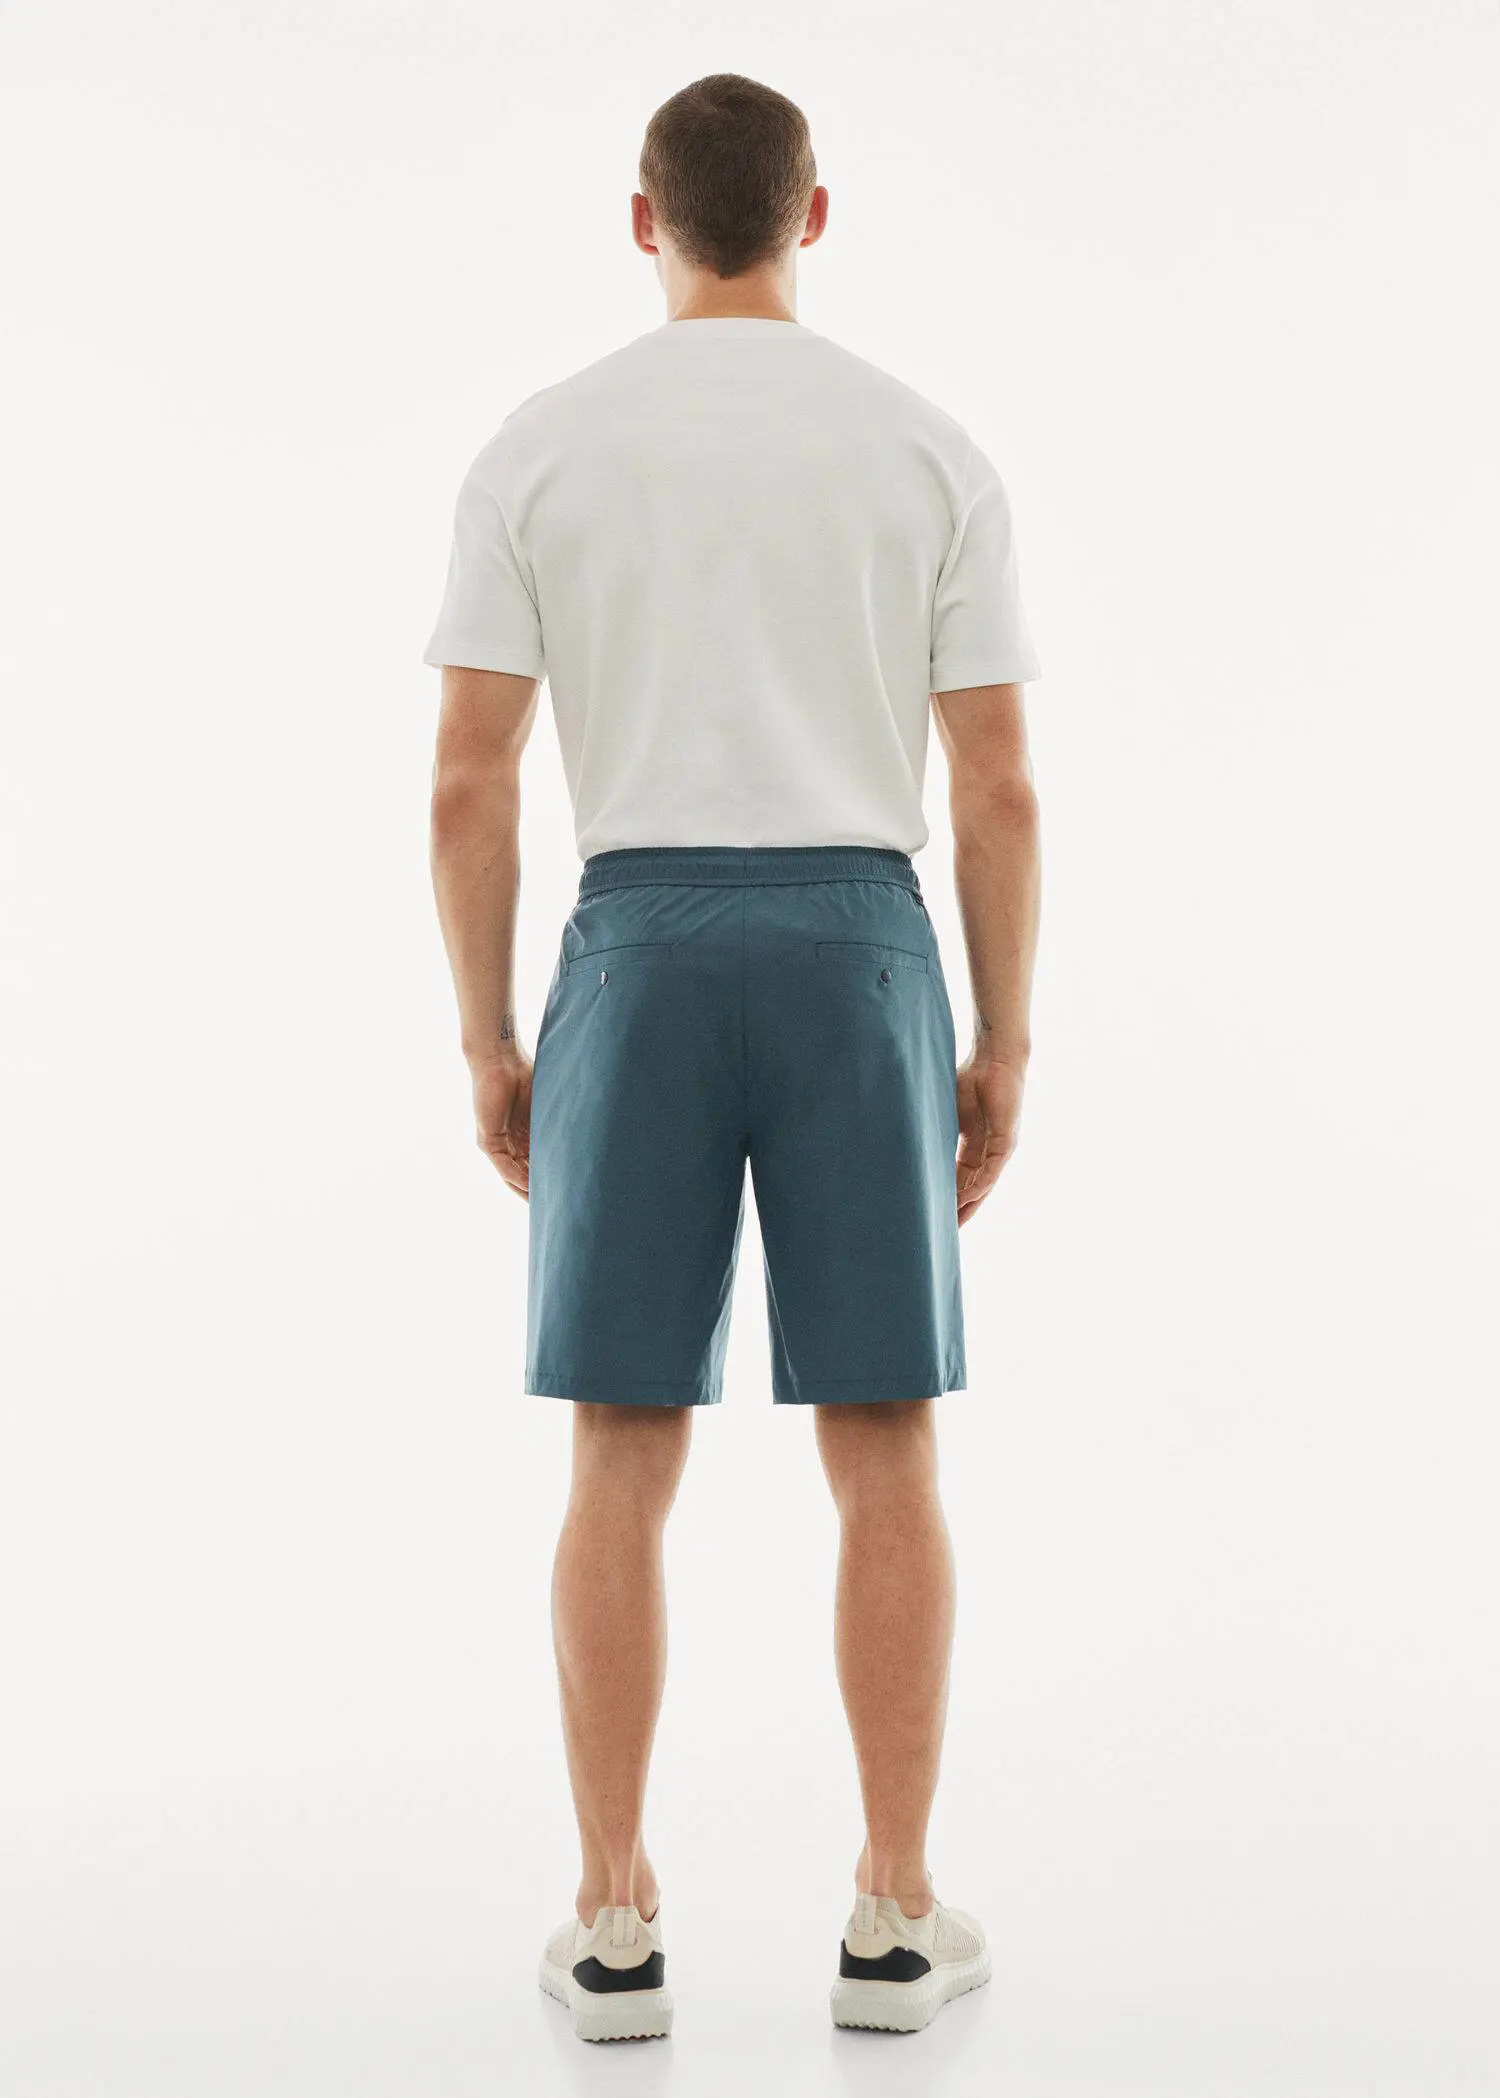 Mango Water-repellent technical bermuda shorts. a man standing in front of a white wall. 